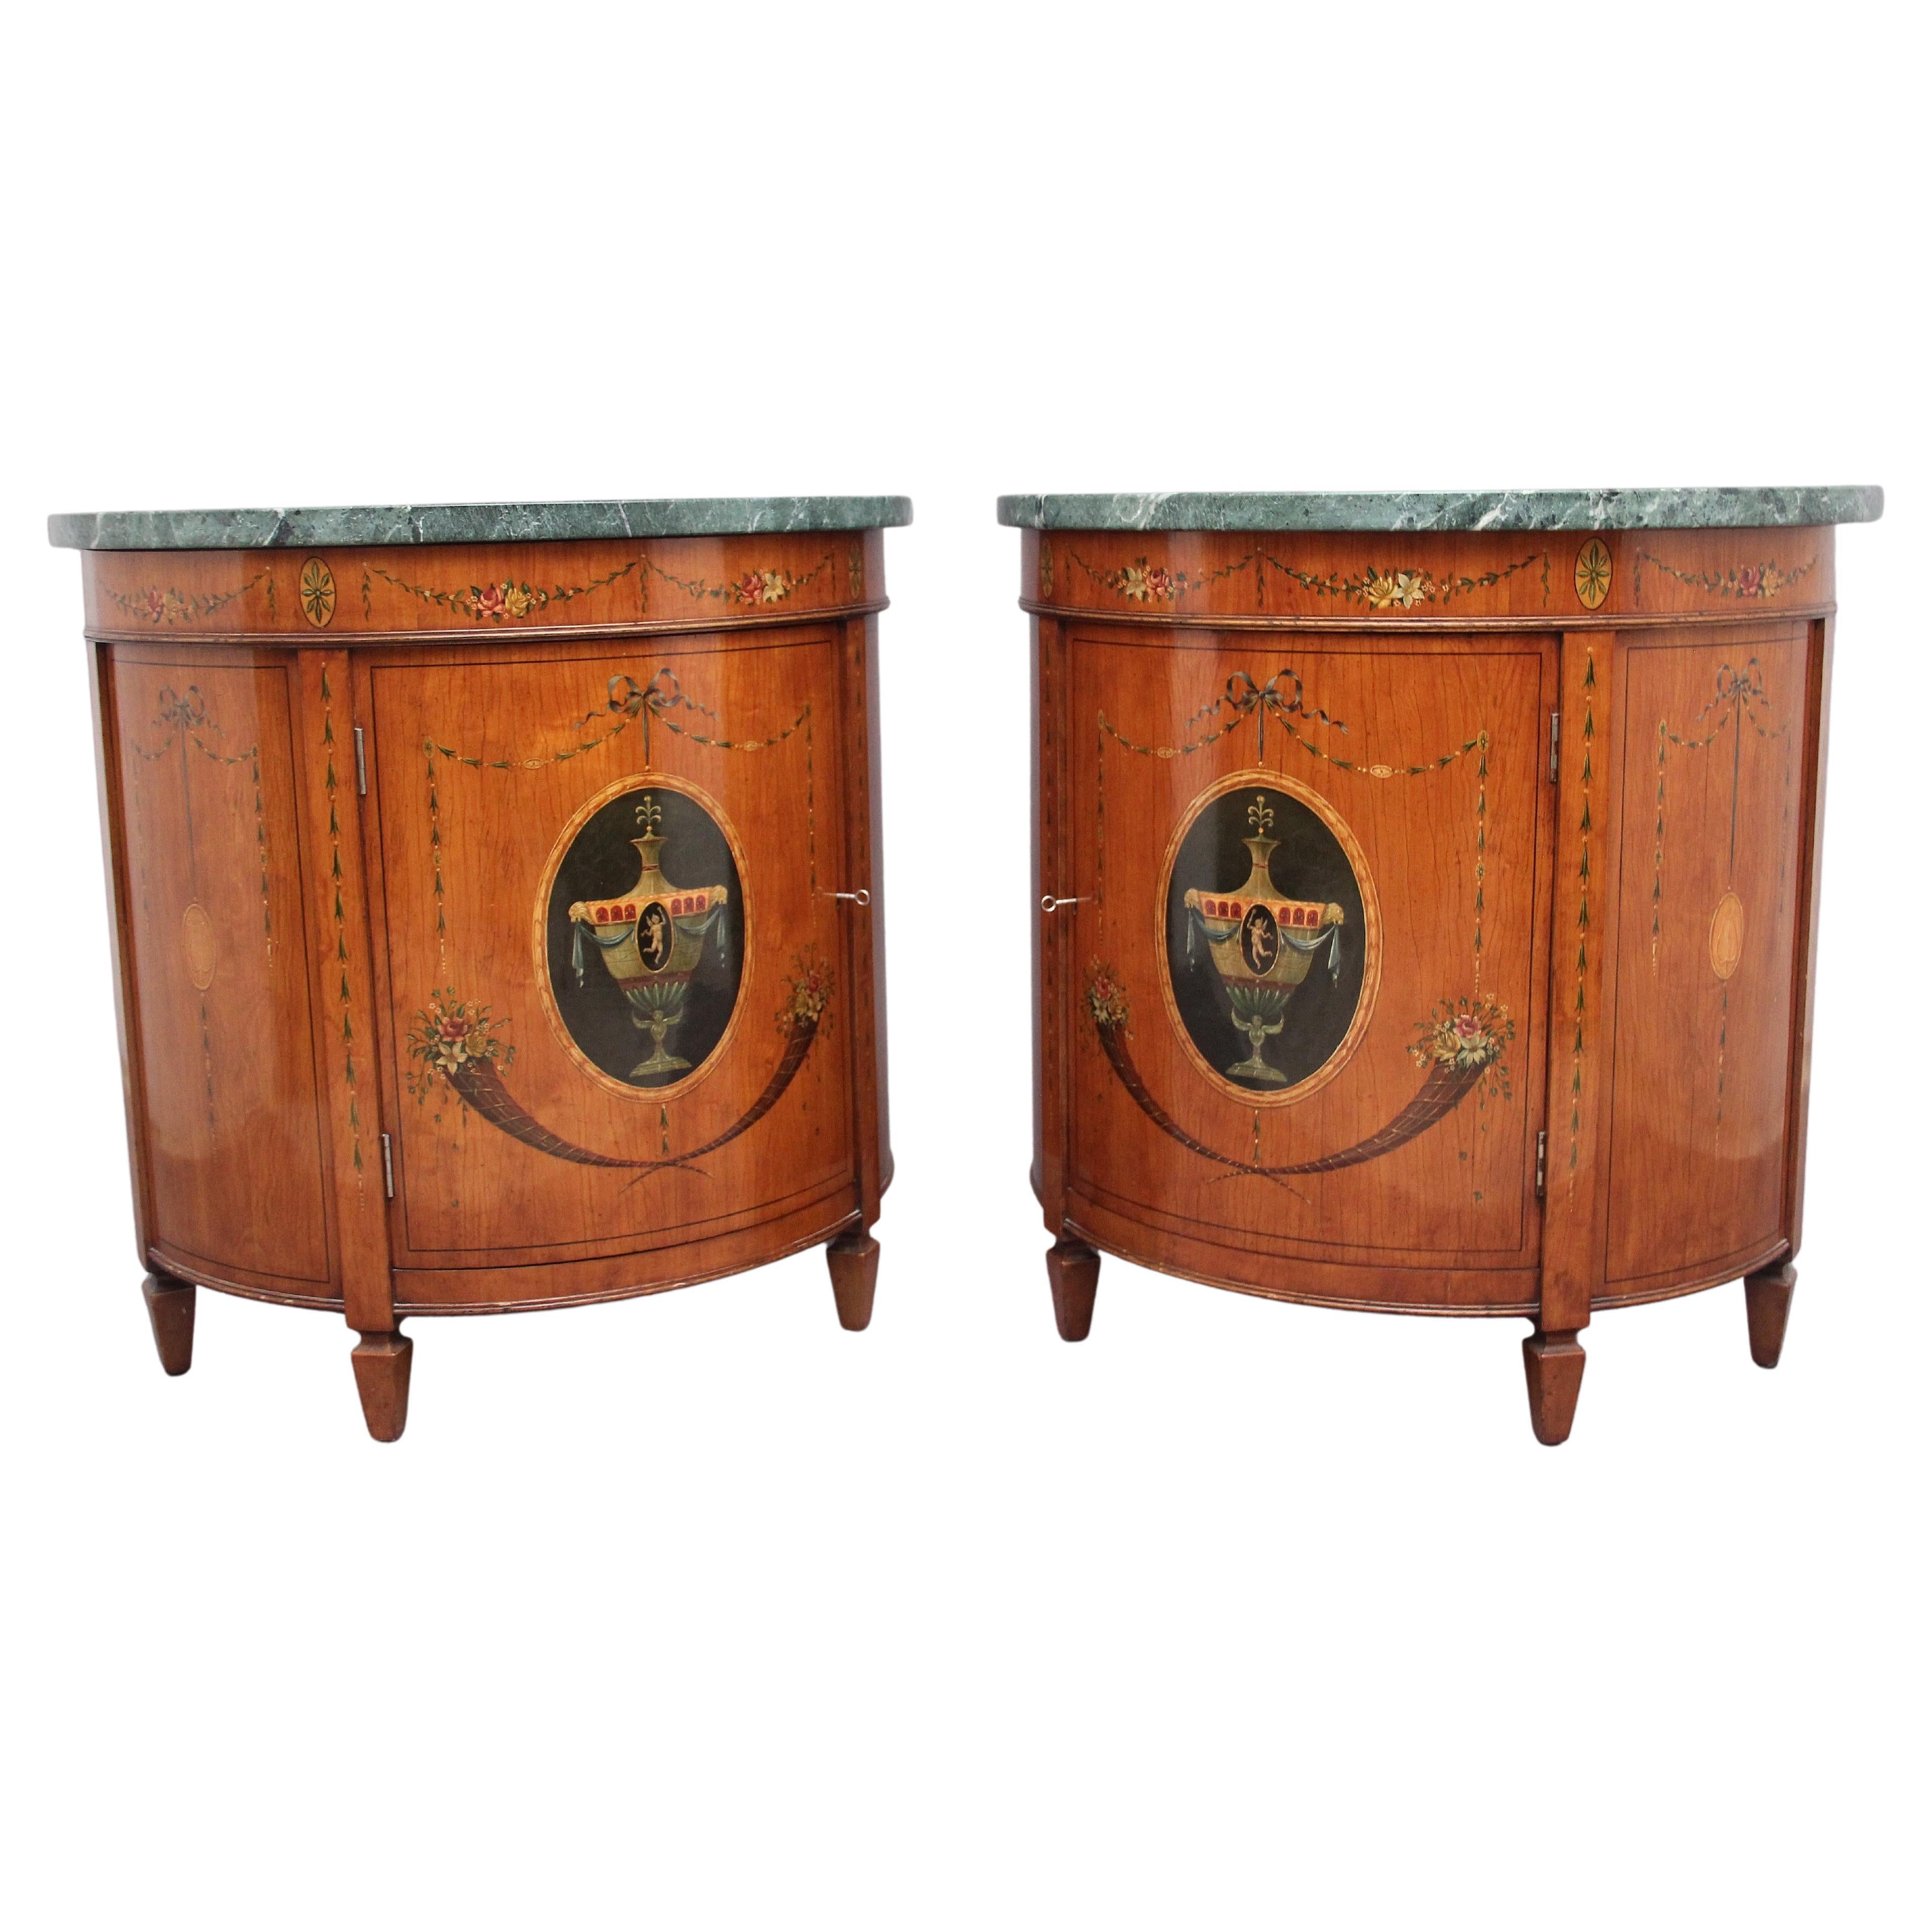 Pair of Early 20th Century Satinwood and Painted Demi Lune Cabinets